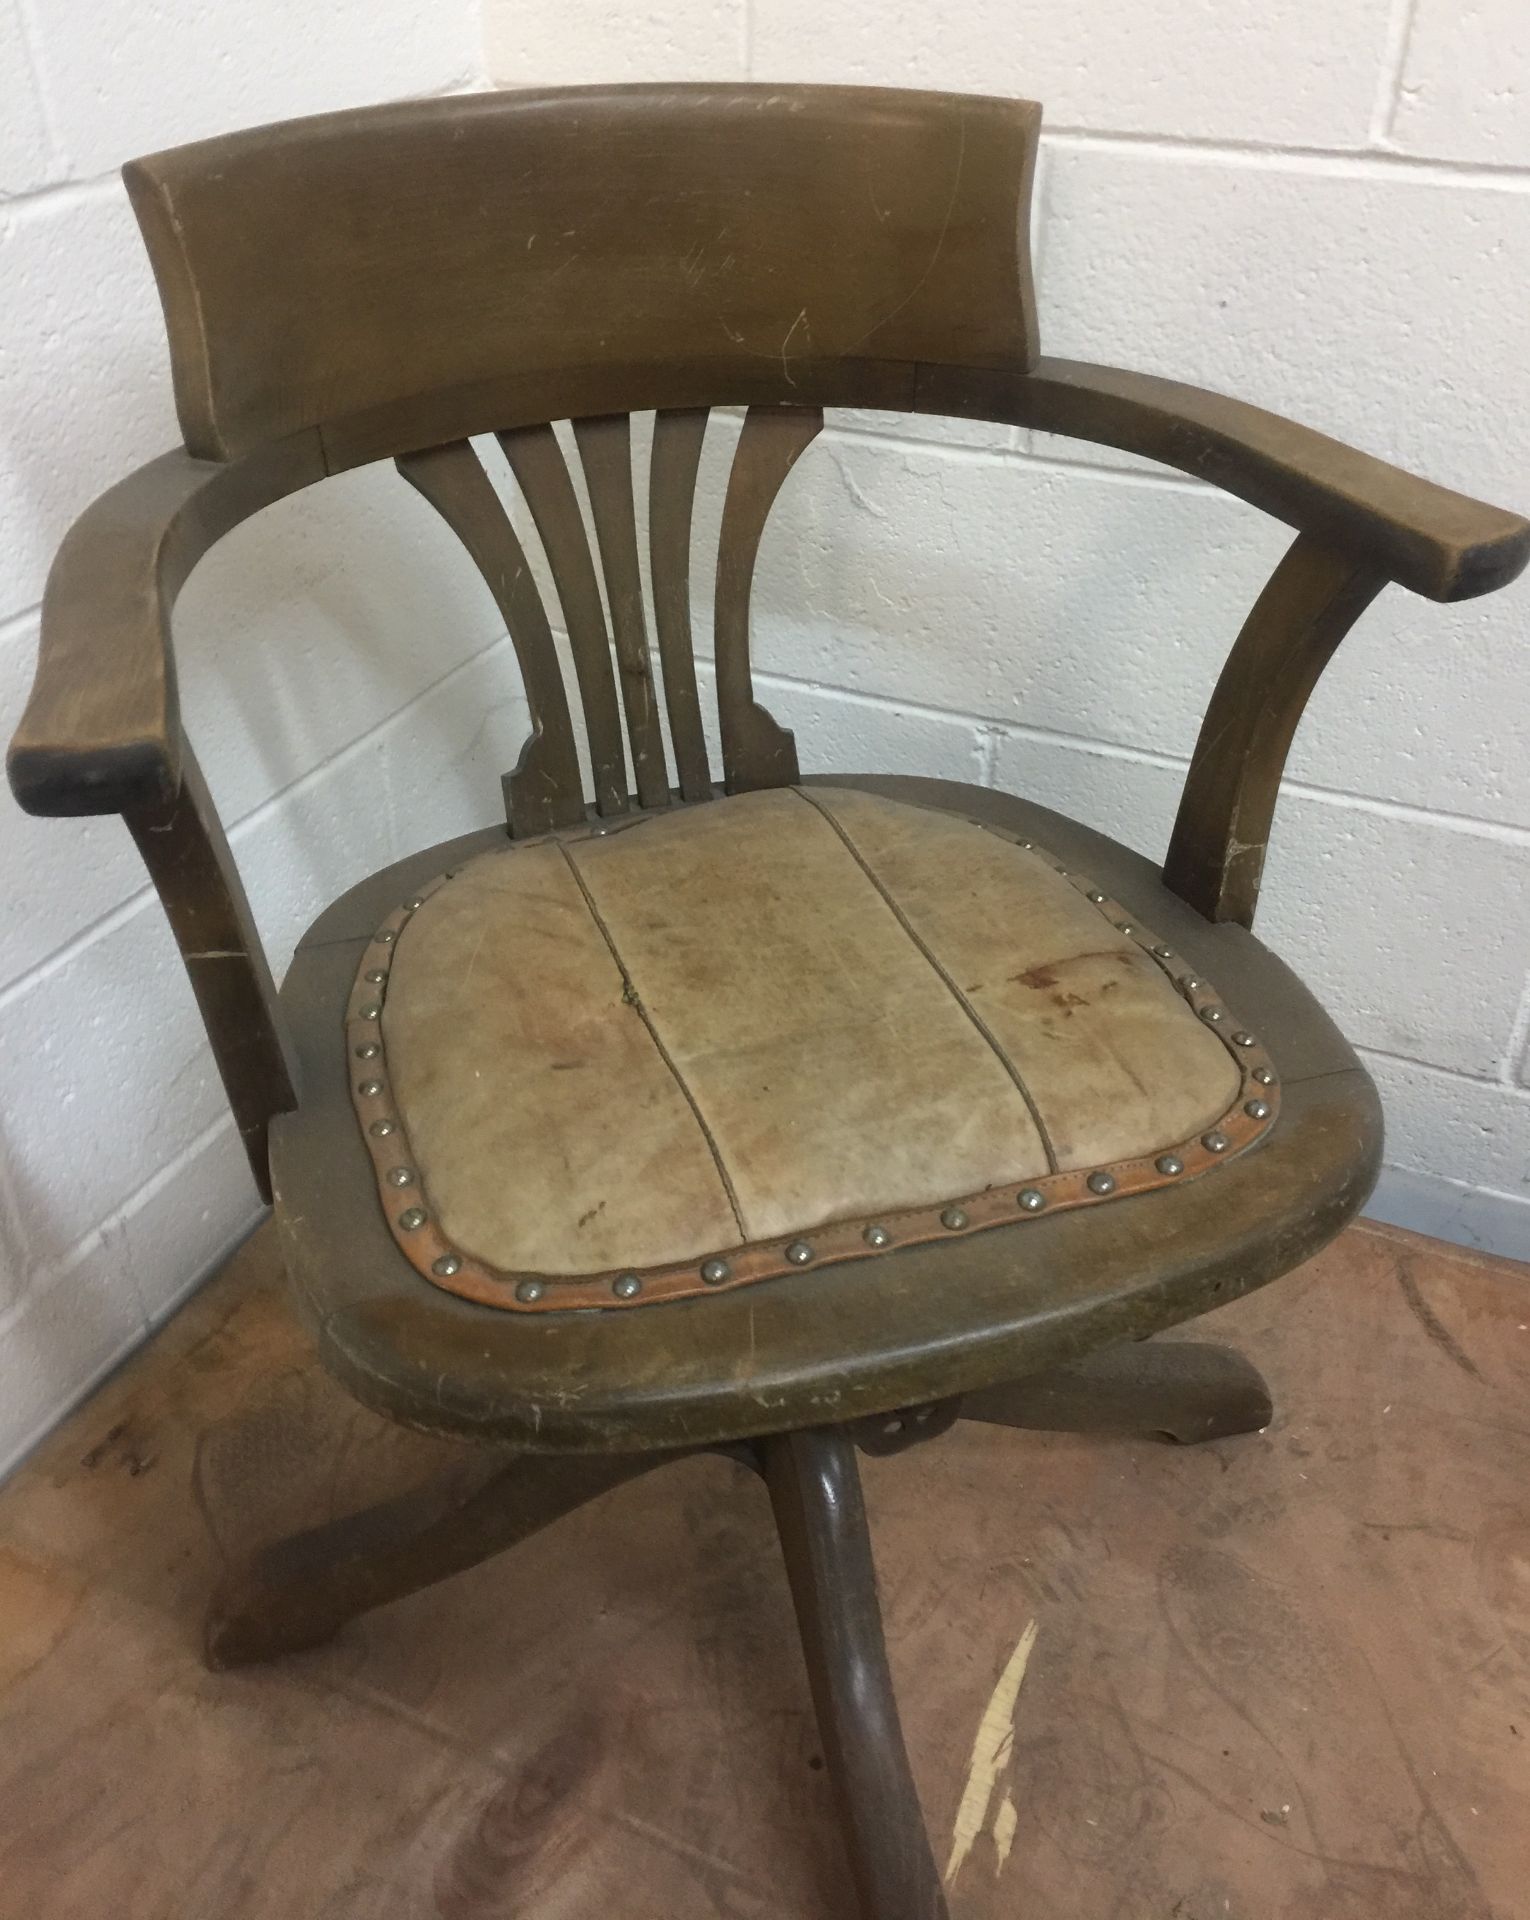 HUGHLY VALUABLE ANTIQUE OFFICE CHAIR - Image 2 of 2